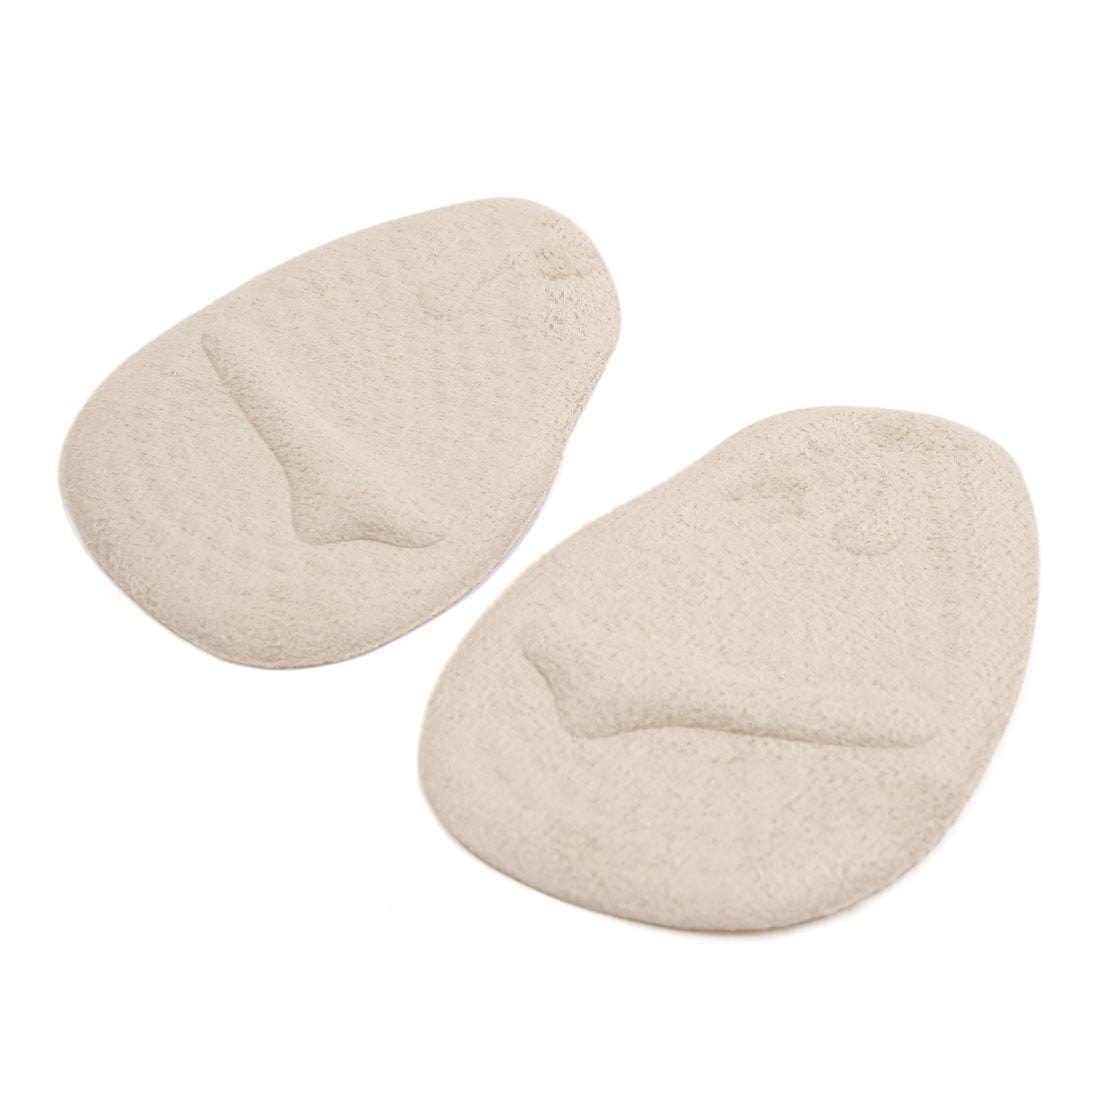 1 Pair Beige Silicone Foot Arch Forefoot Pad Metatarsal Cushion Insole ...